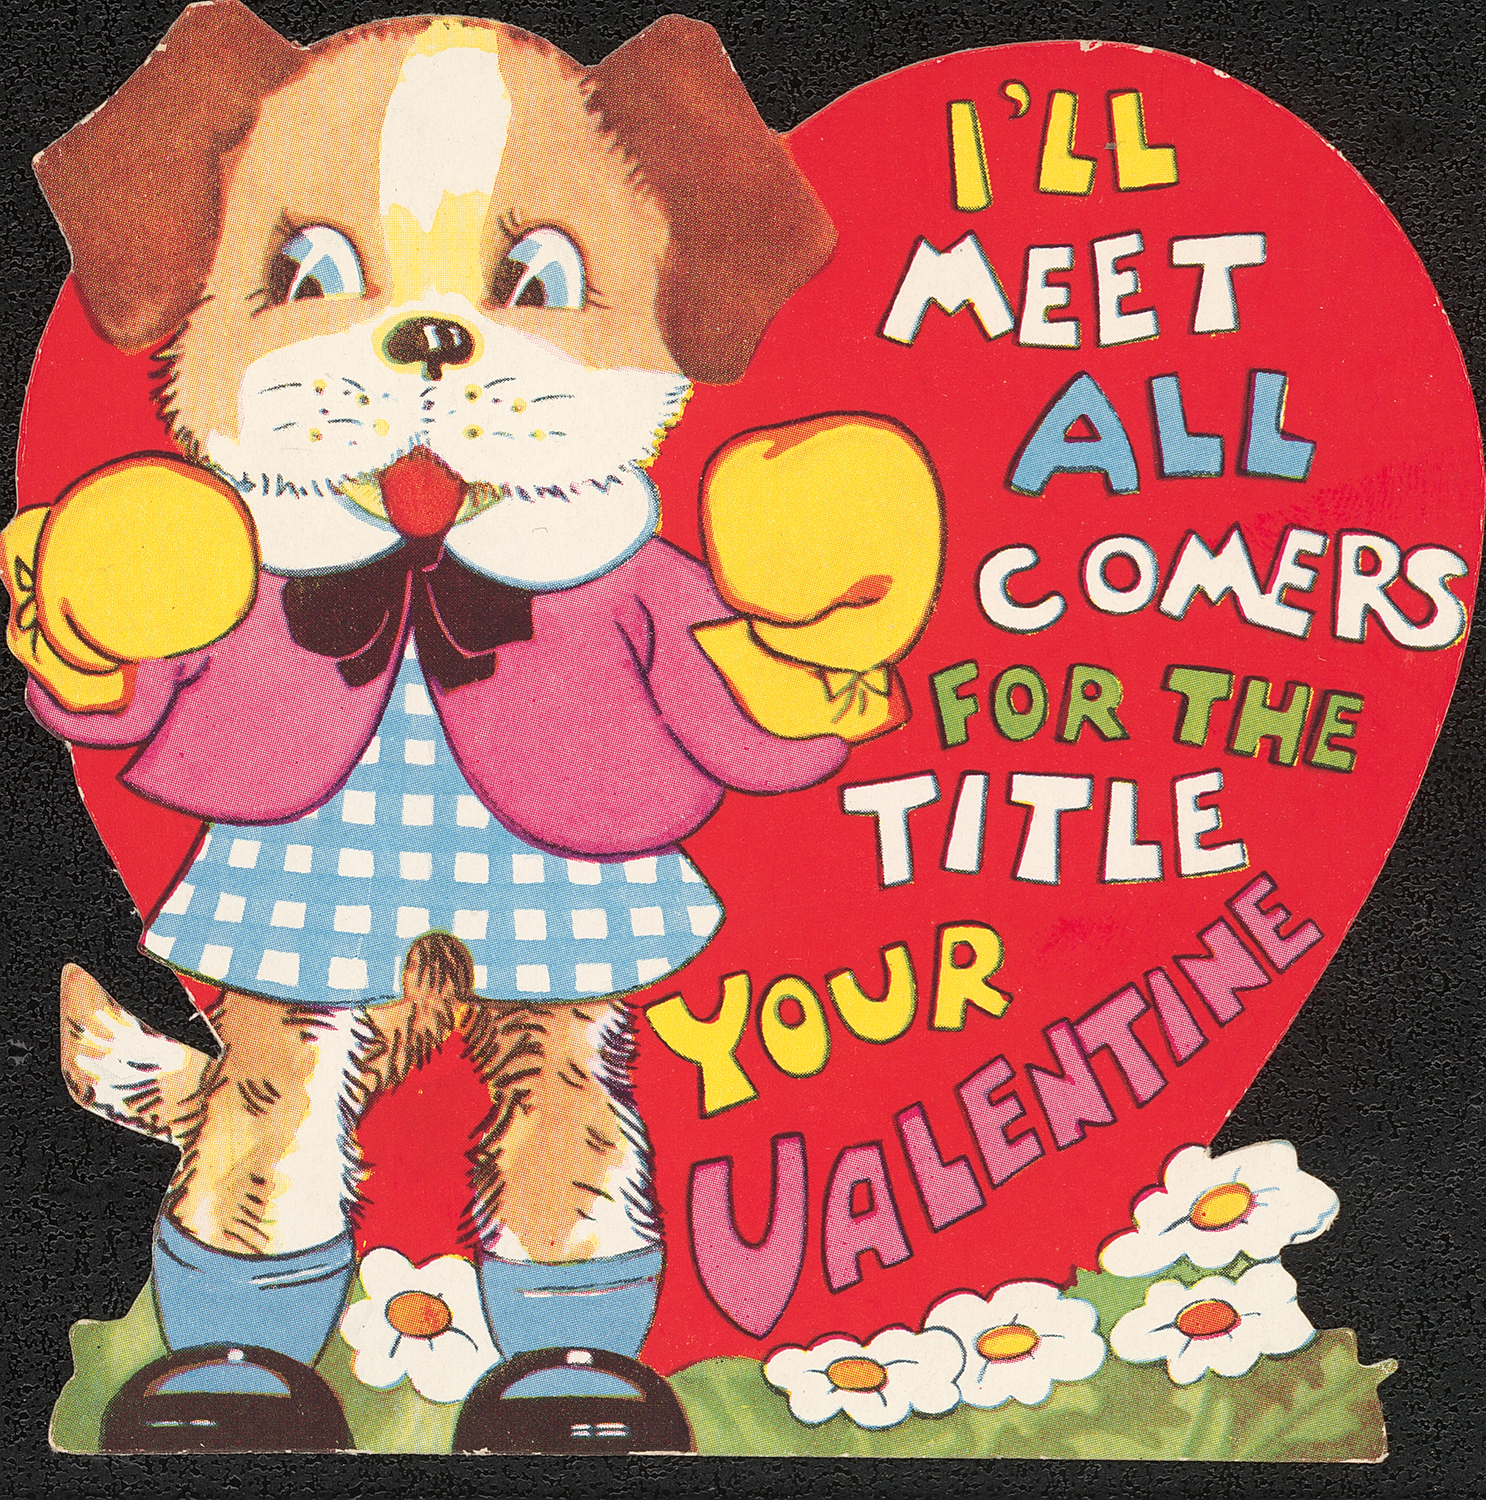 I'll meet all comers for the title of "Your Valentine."